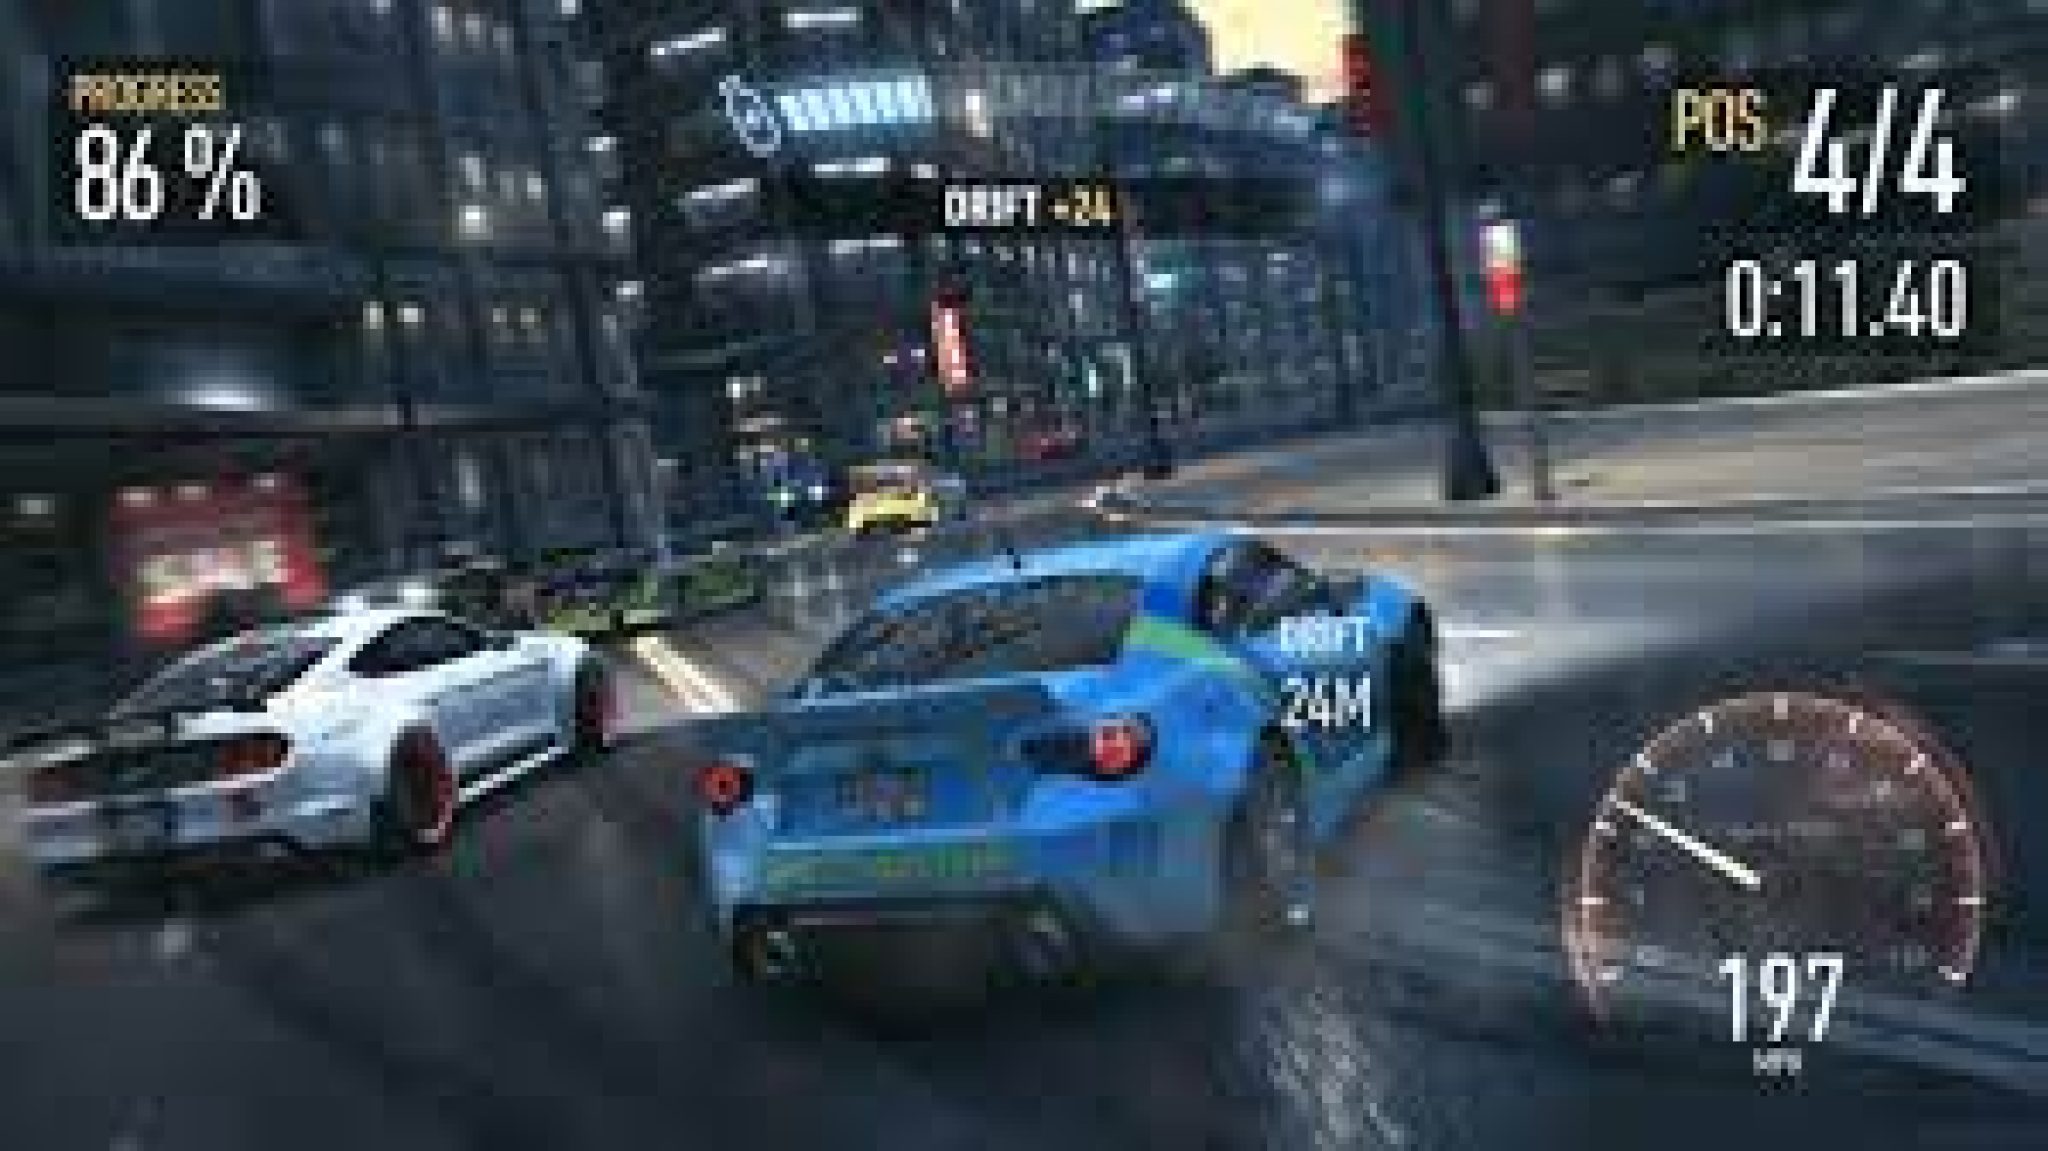 free games no time limit full version download